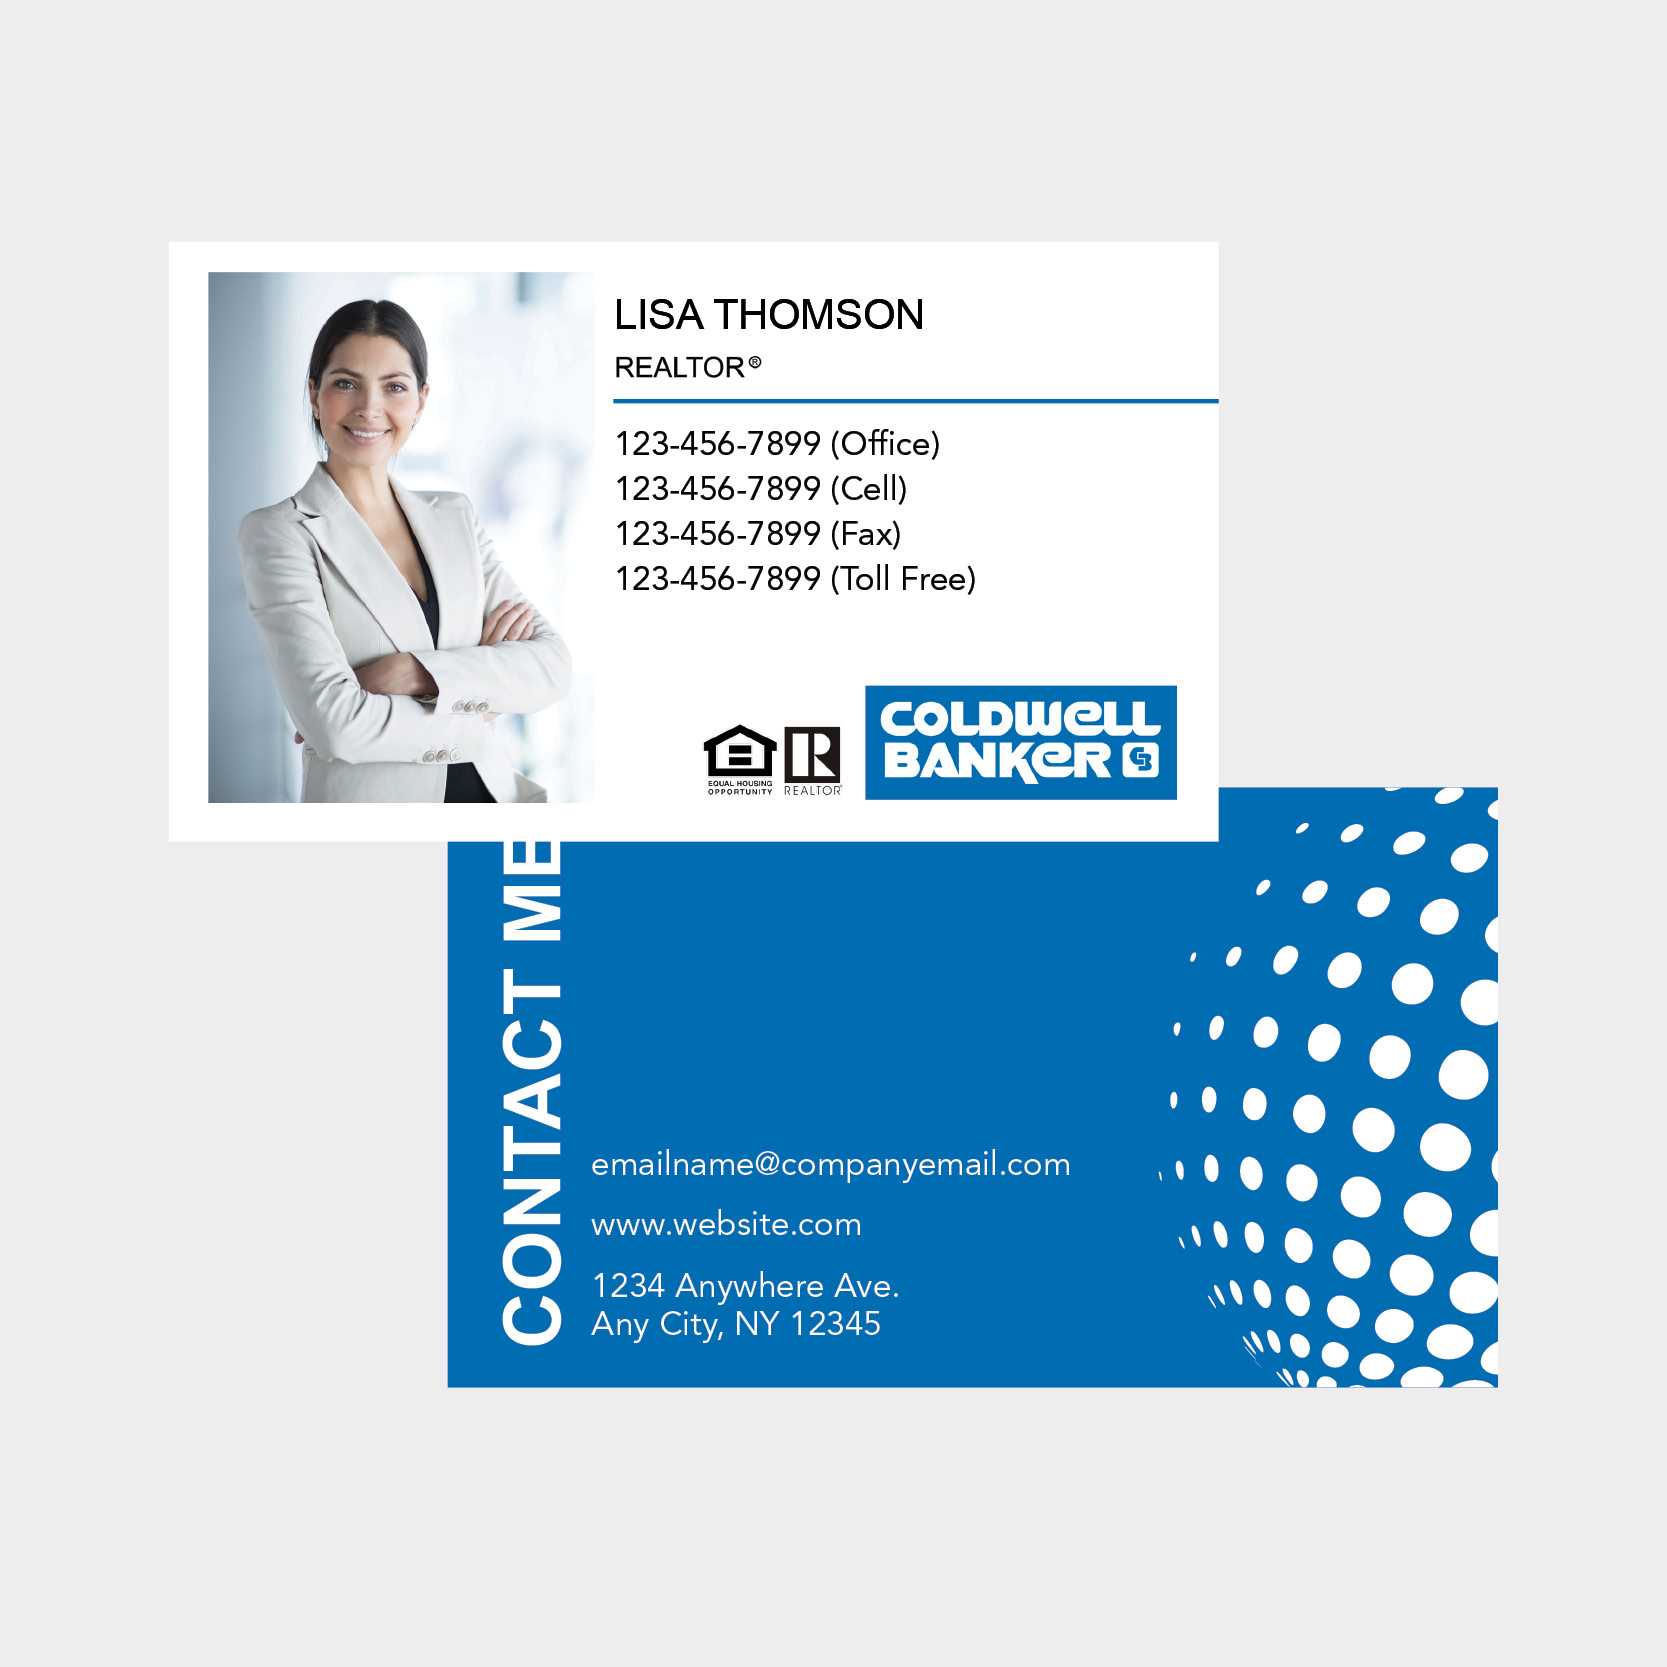 Coldwell Banker Business Cards For Coldwell Banker Business Card Template